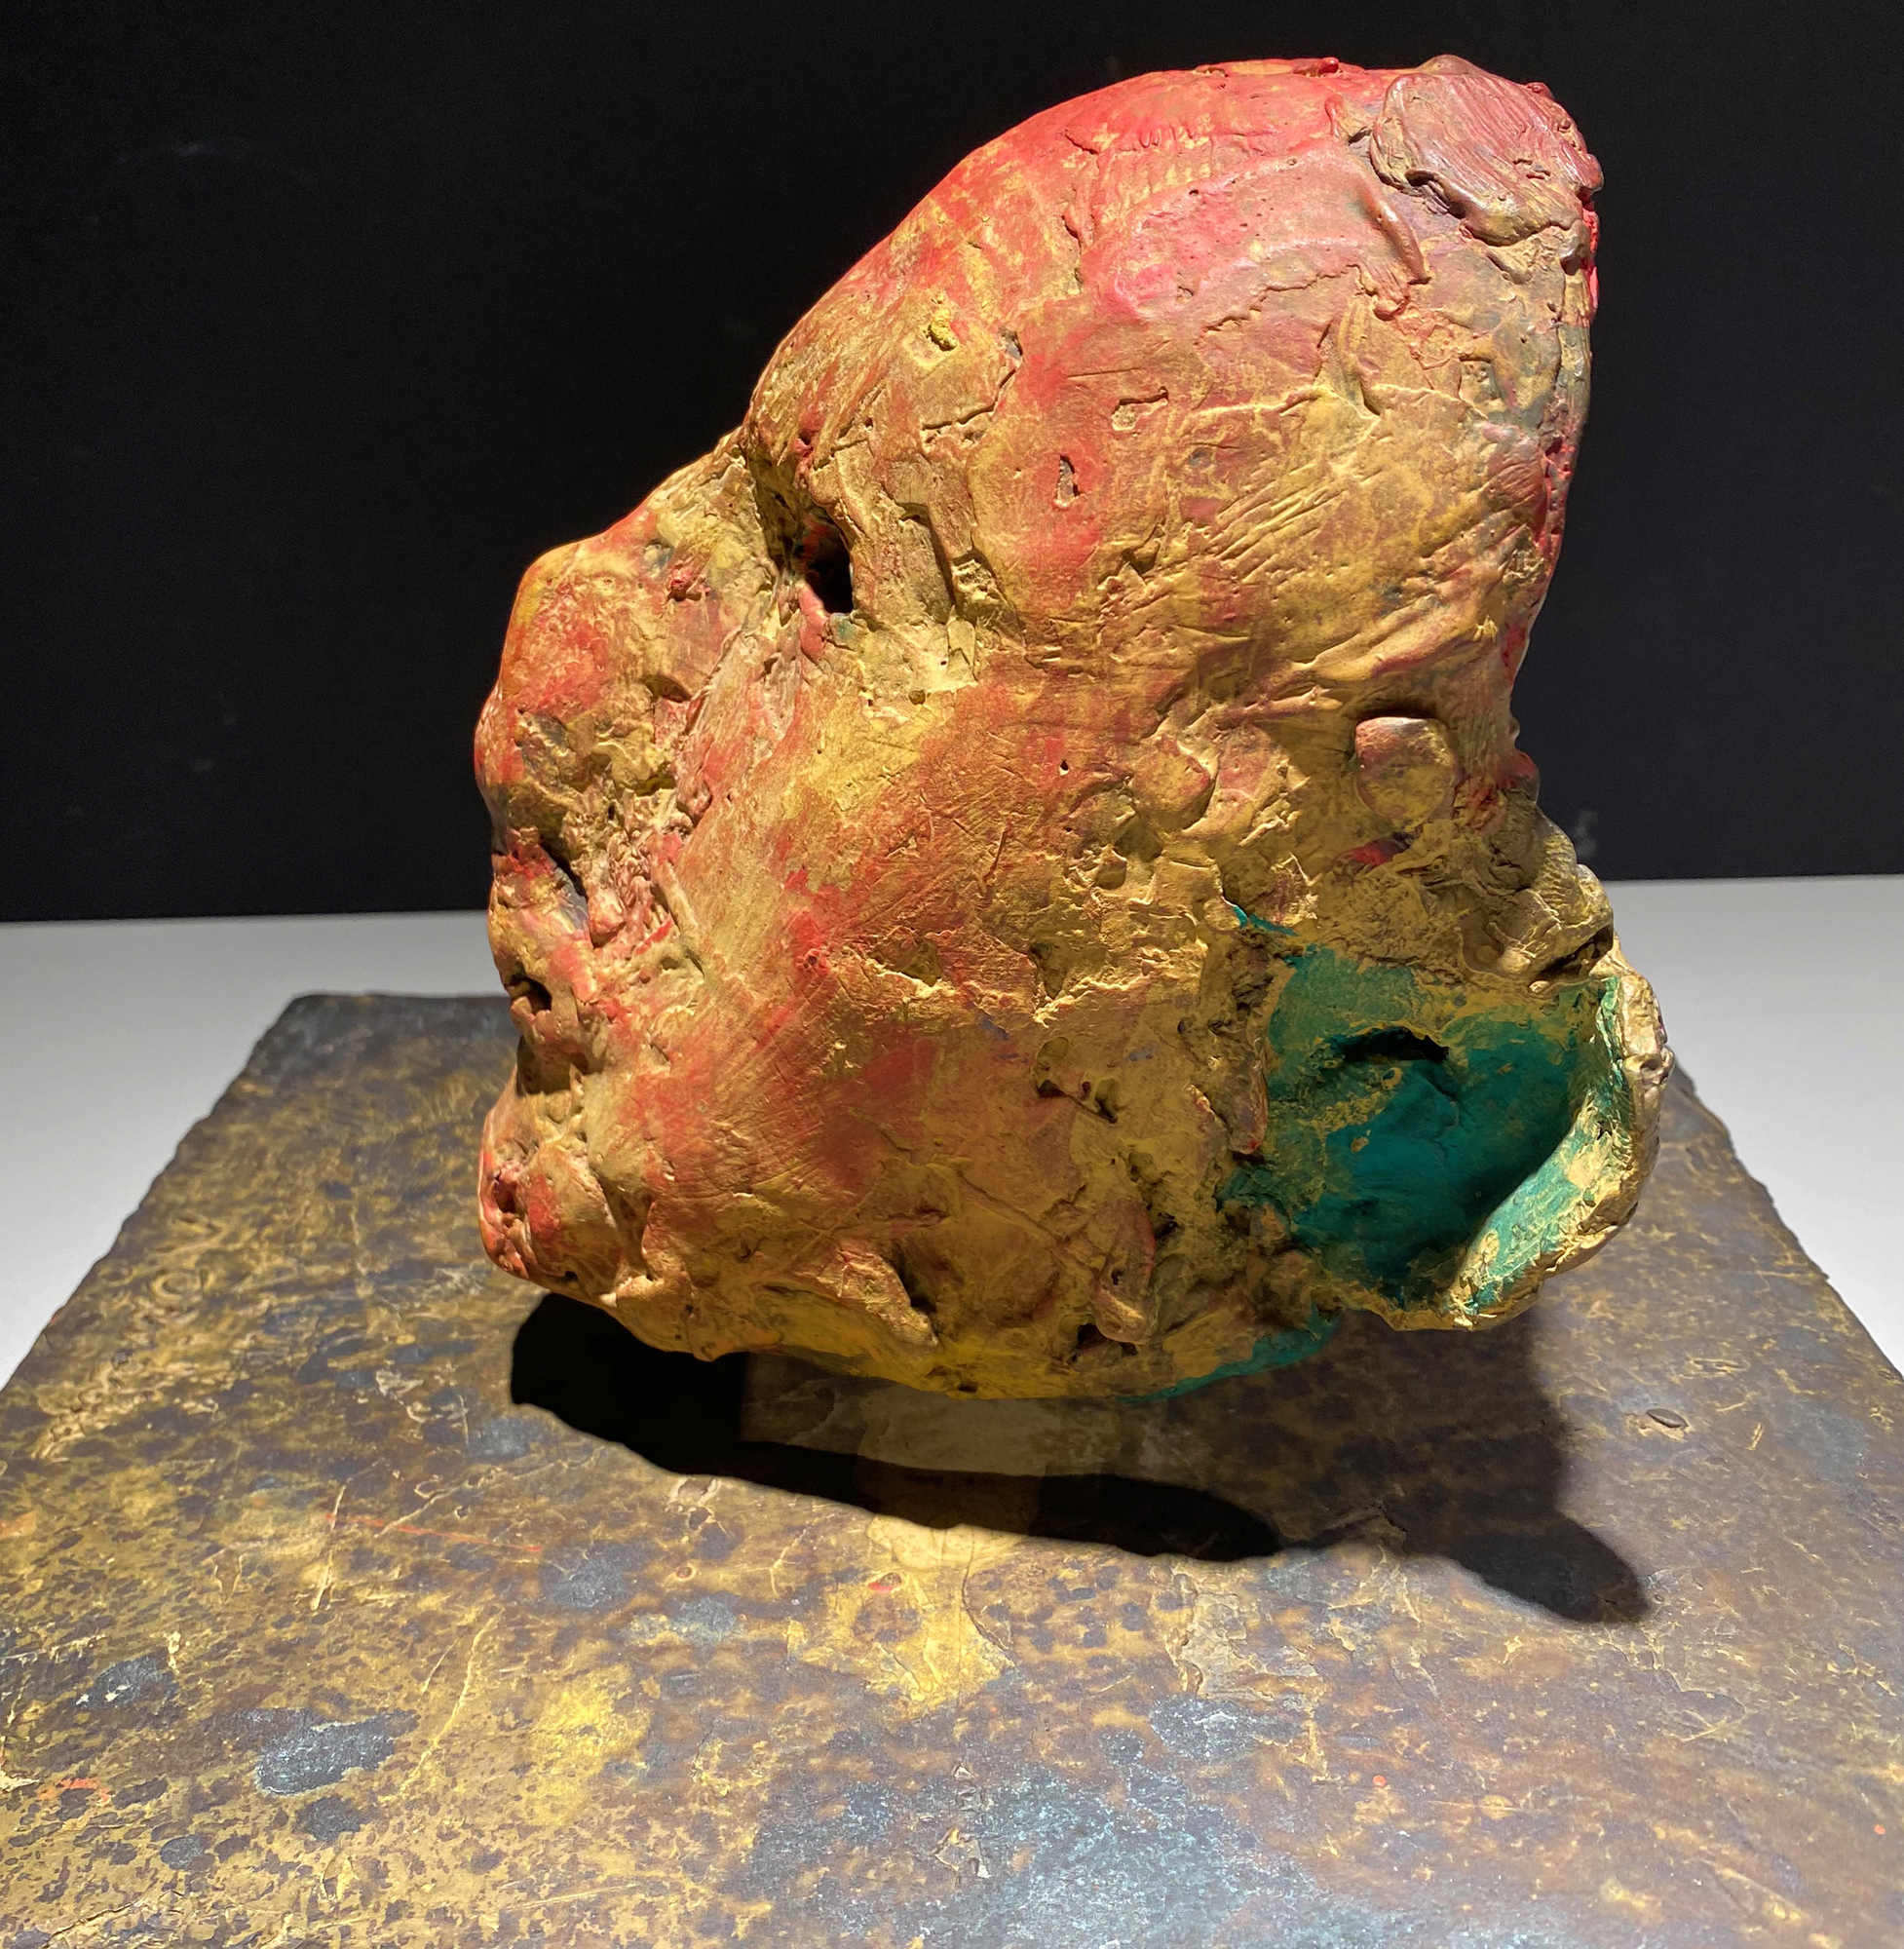 NATHAN OLIVEIRA - Mask #6 (Maroon with Green Ear) - bronze and acrylic - 9 x 11 3/4 x 11 3/4 in.